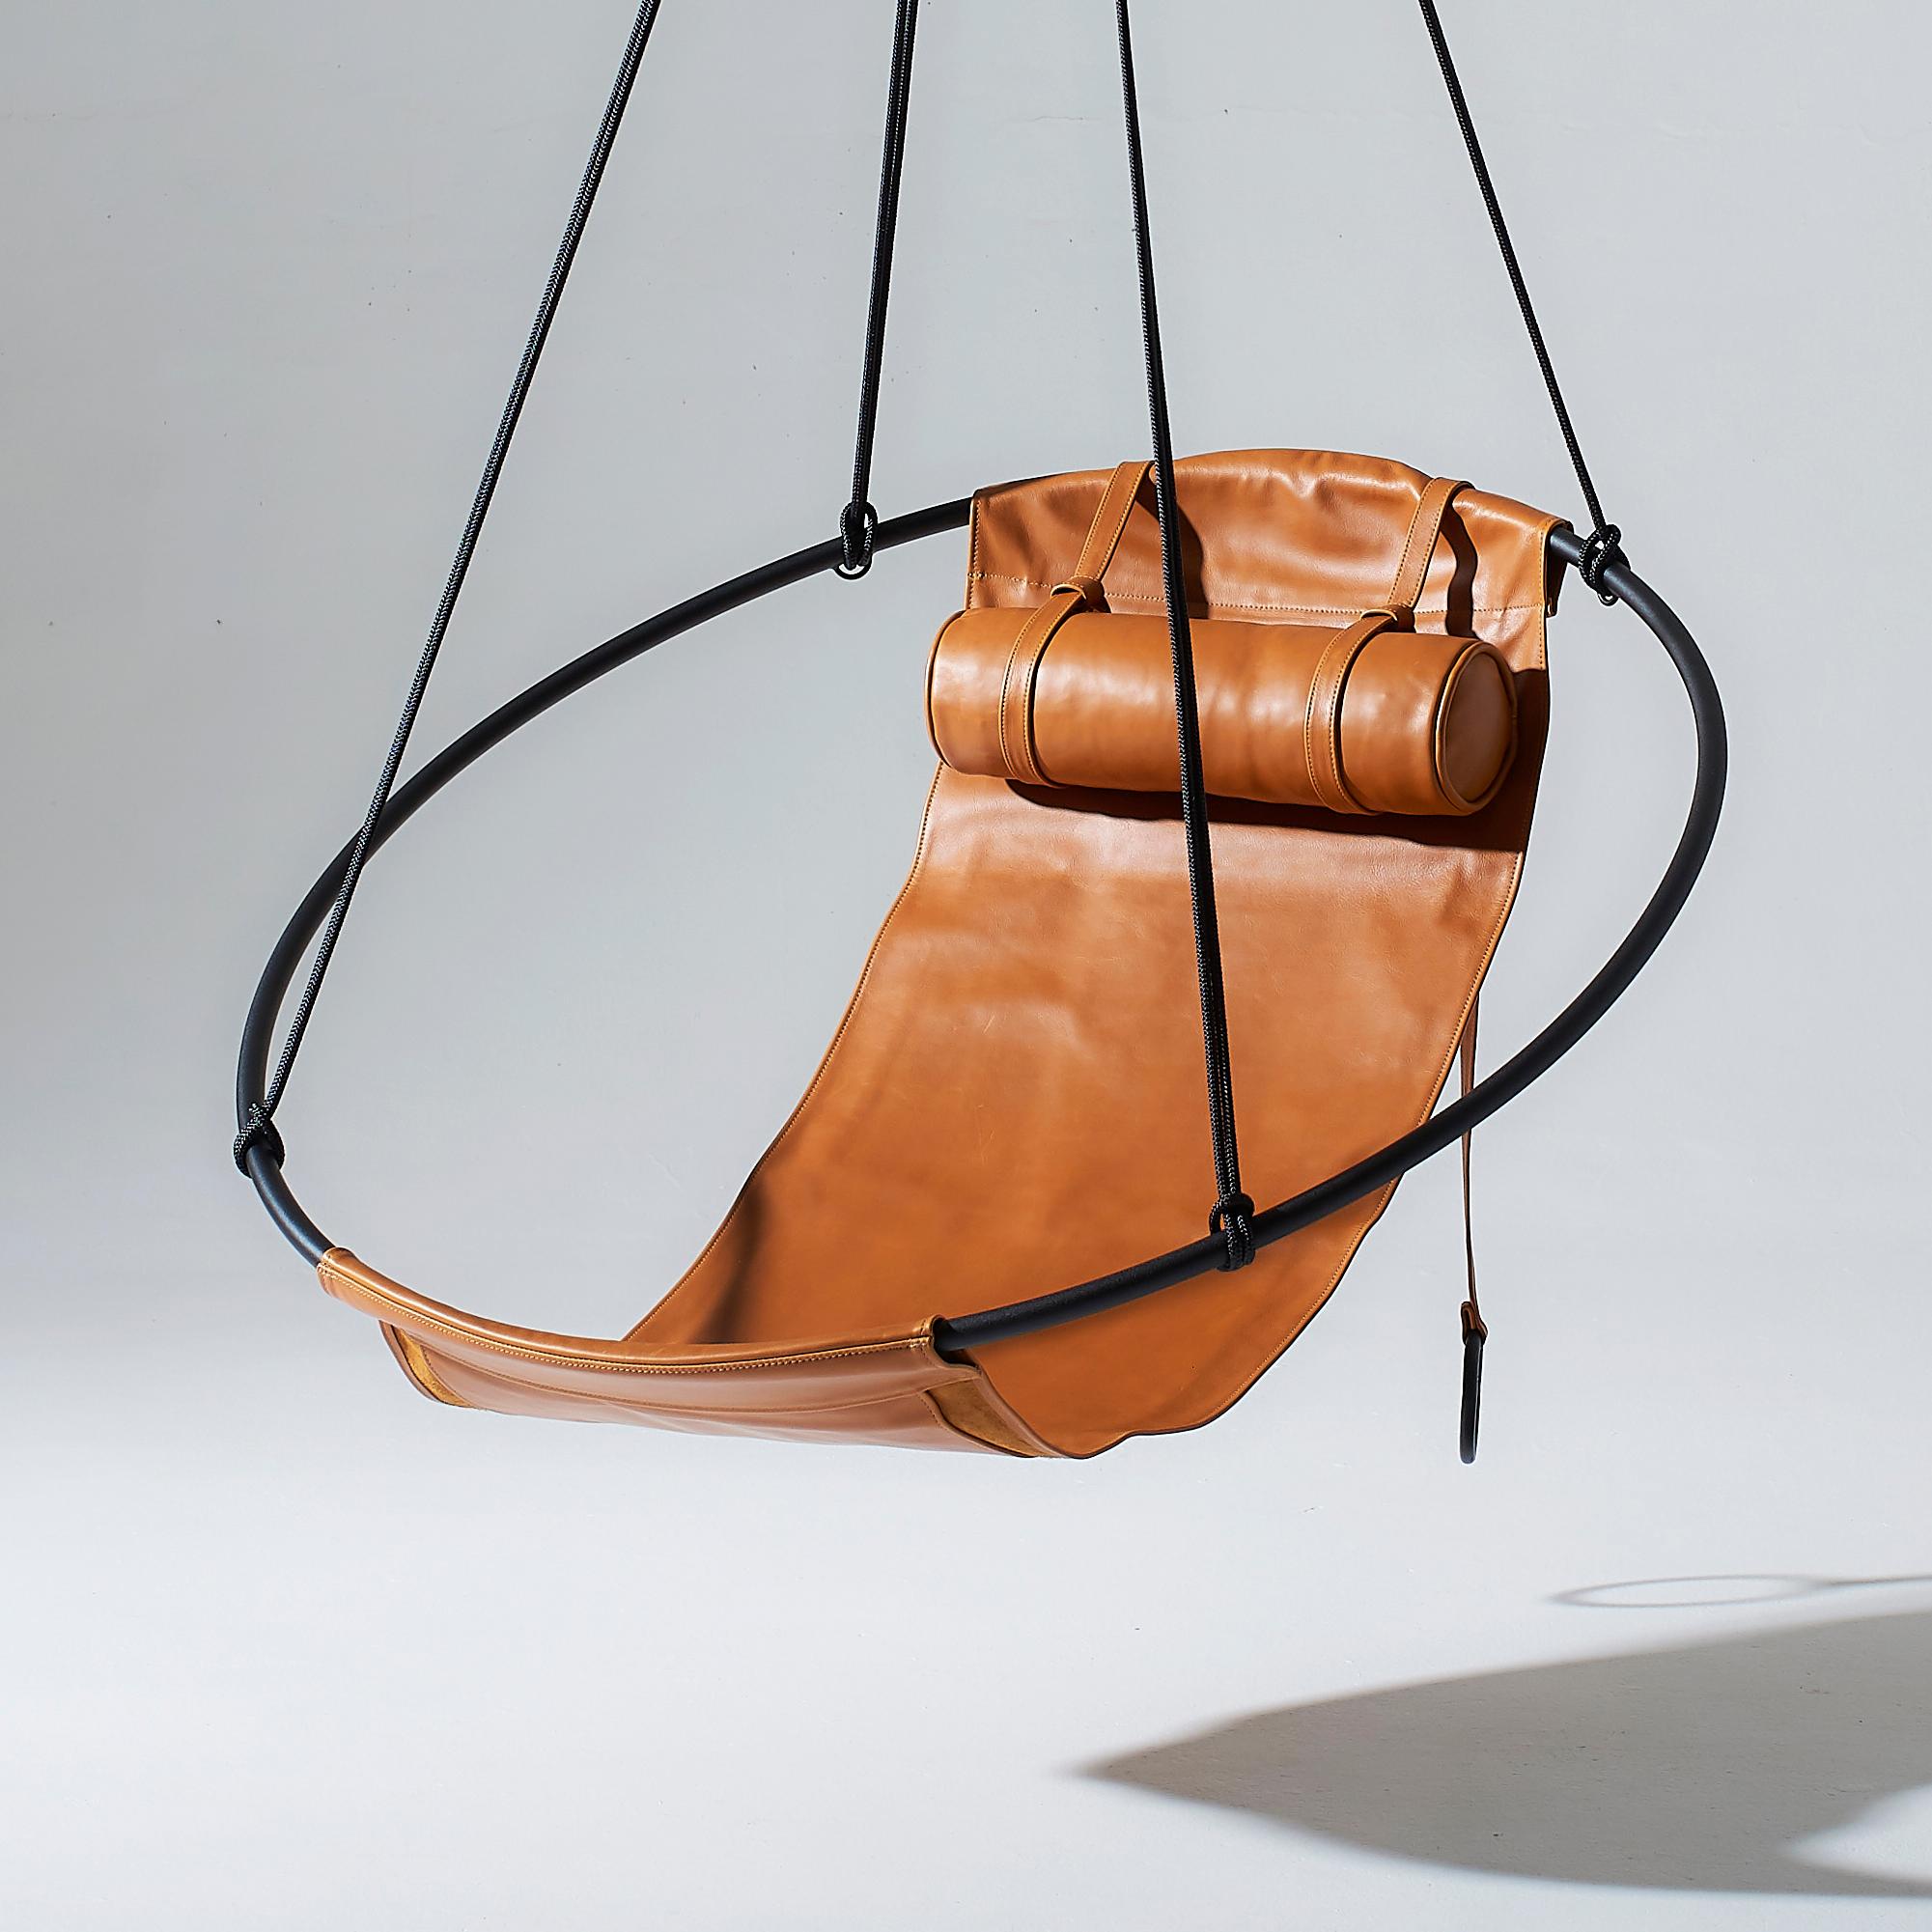 Modern Genuine Ochre Soft Leather Tan Sling - Swing Chair In New Condition For Sale In Johannesburg, ZA